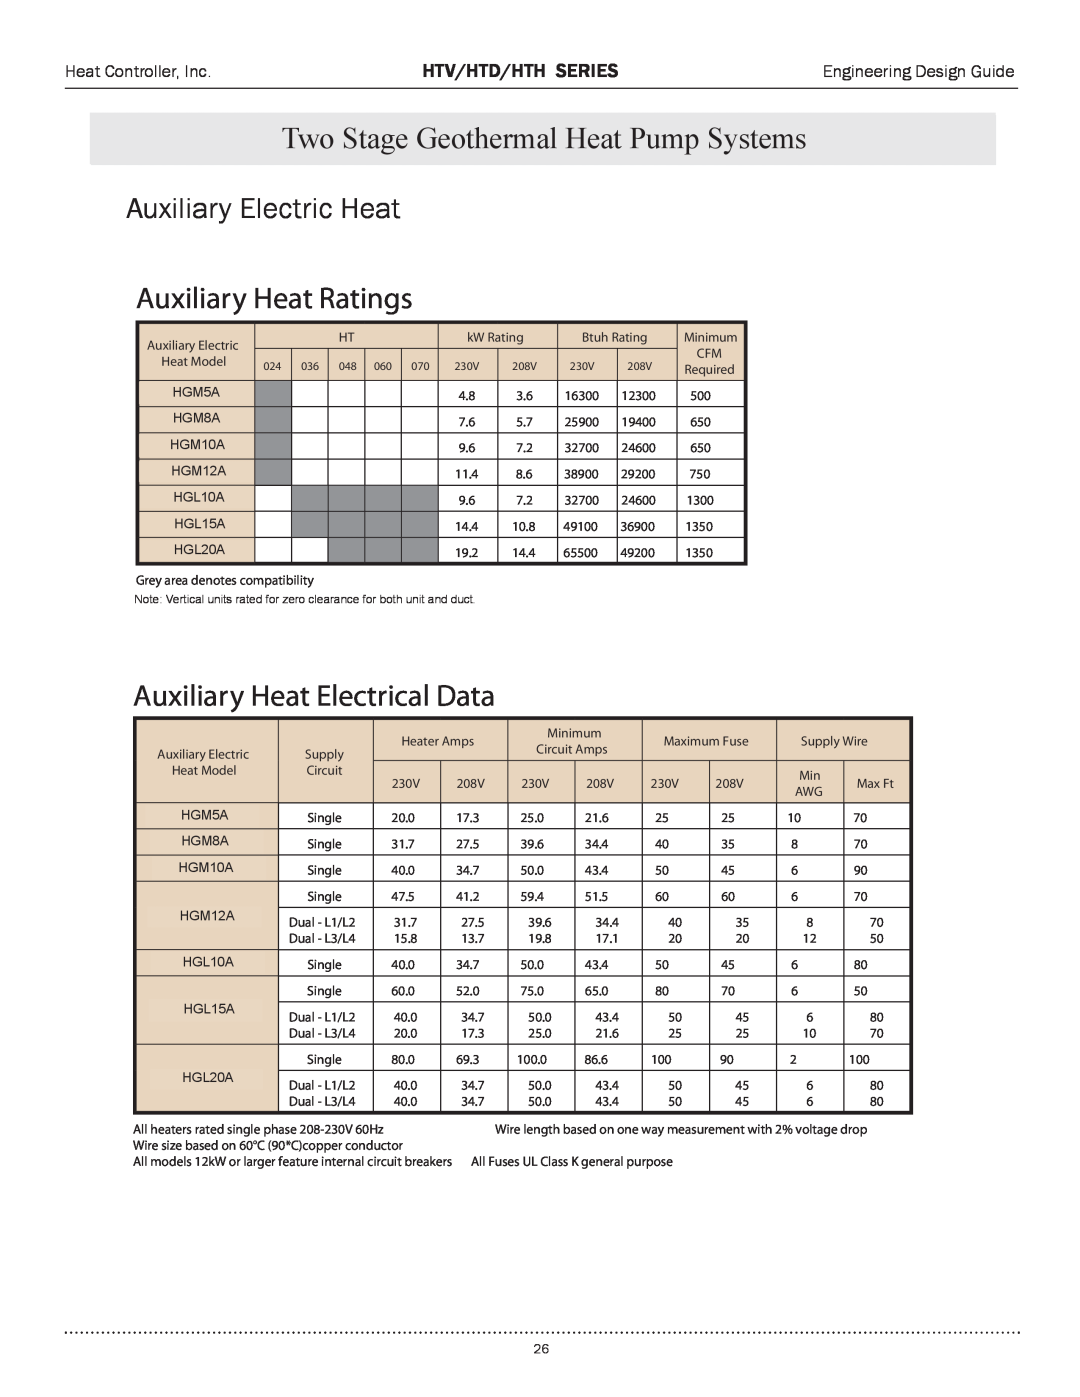 Heat Controller HTD SERIES, HTH SERIES Auxiliary Electric Heat, Auxiliary Heat Ratings, Auxiliary Heat Electrical Data 